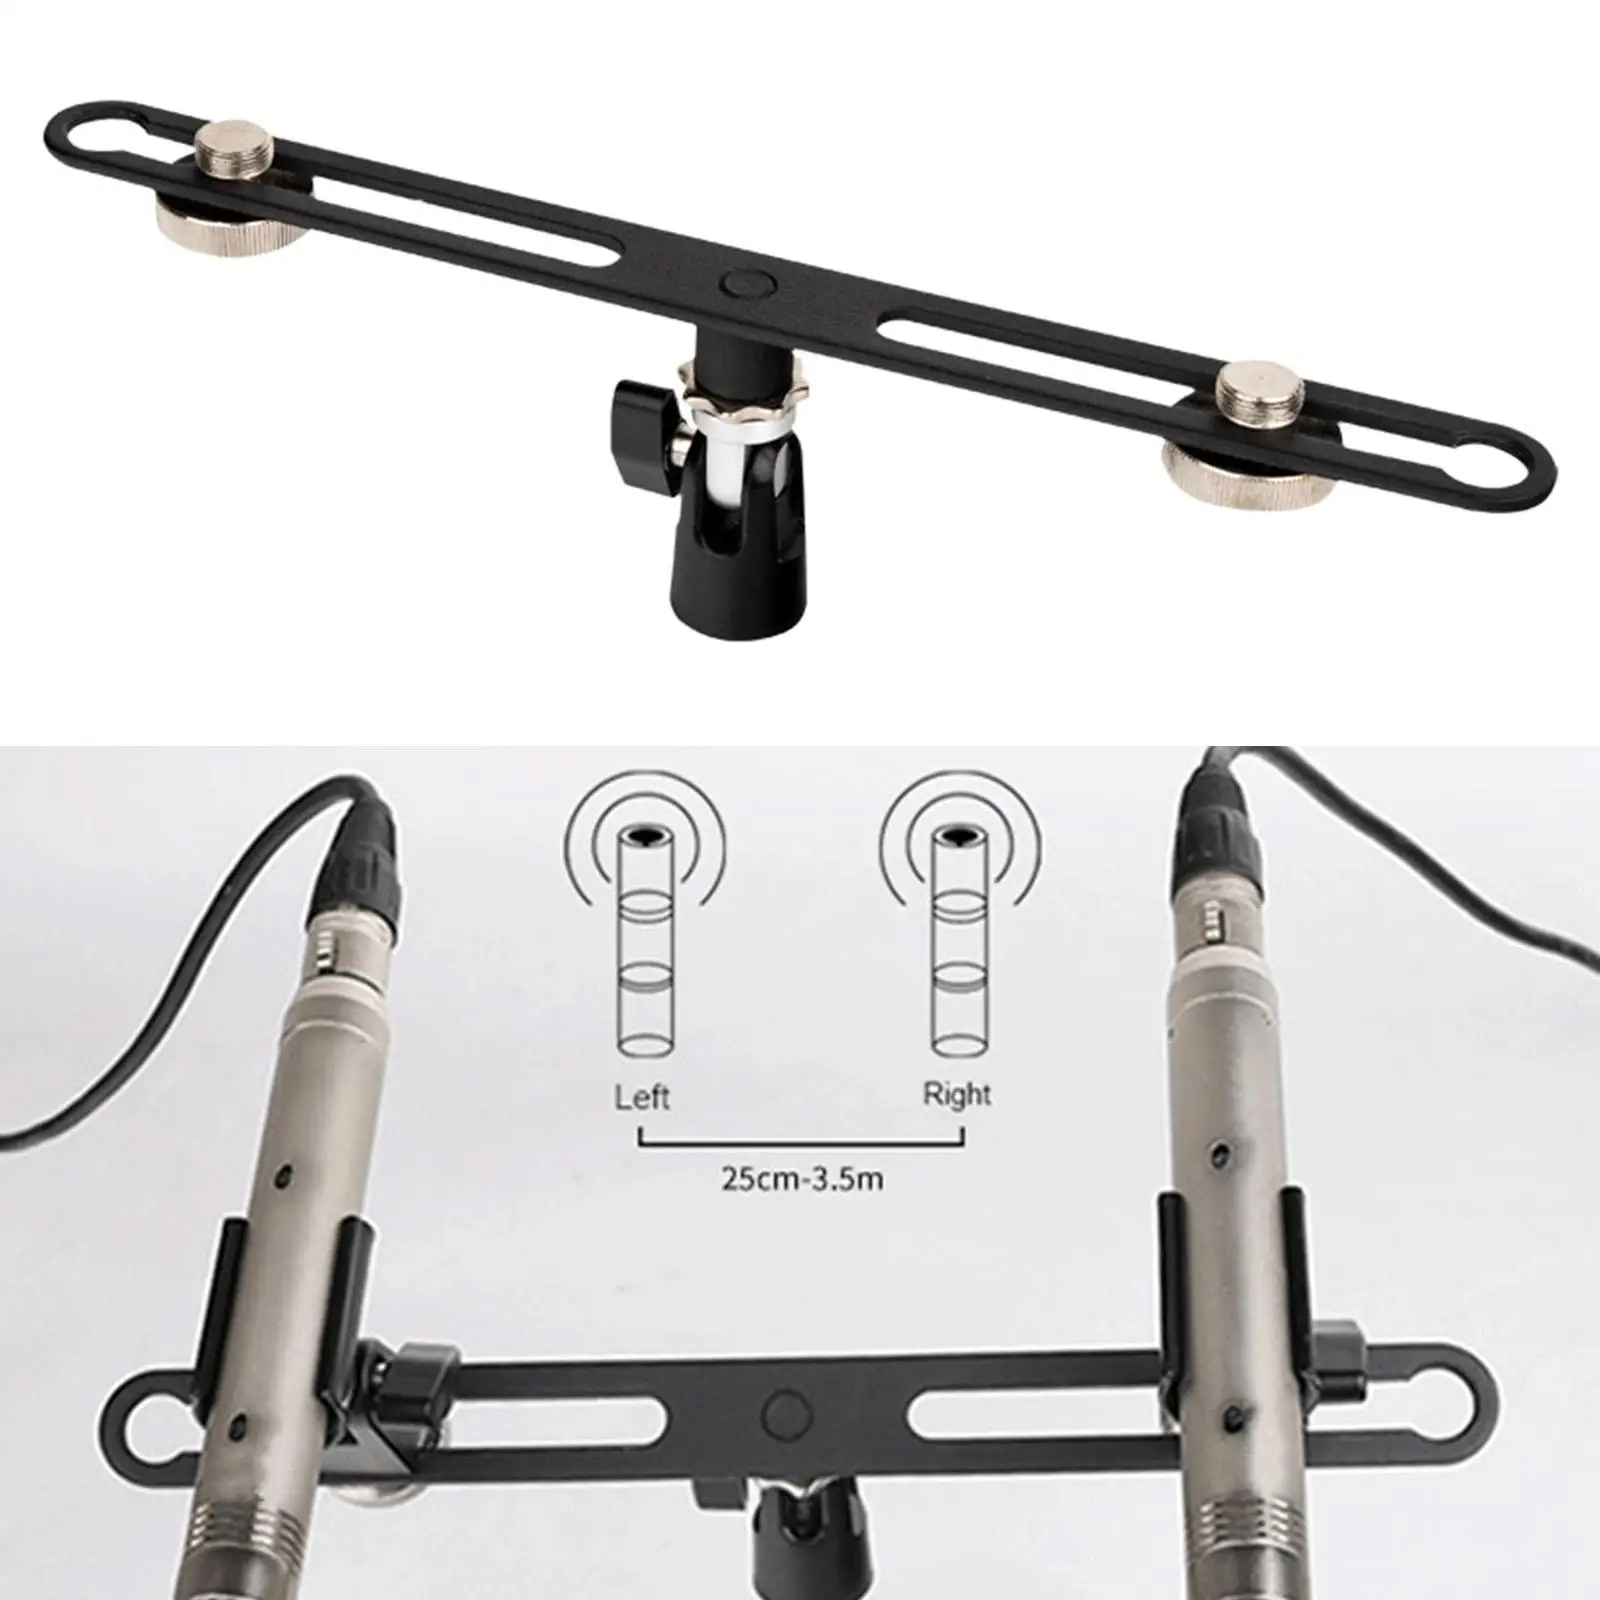 Adjustable Microphone Bar for Accommodates Two Microphones Press Conference